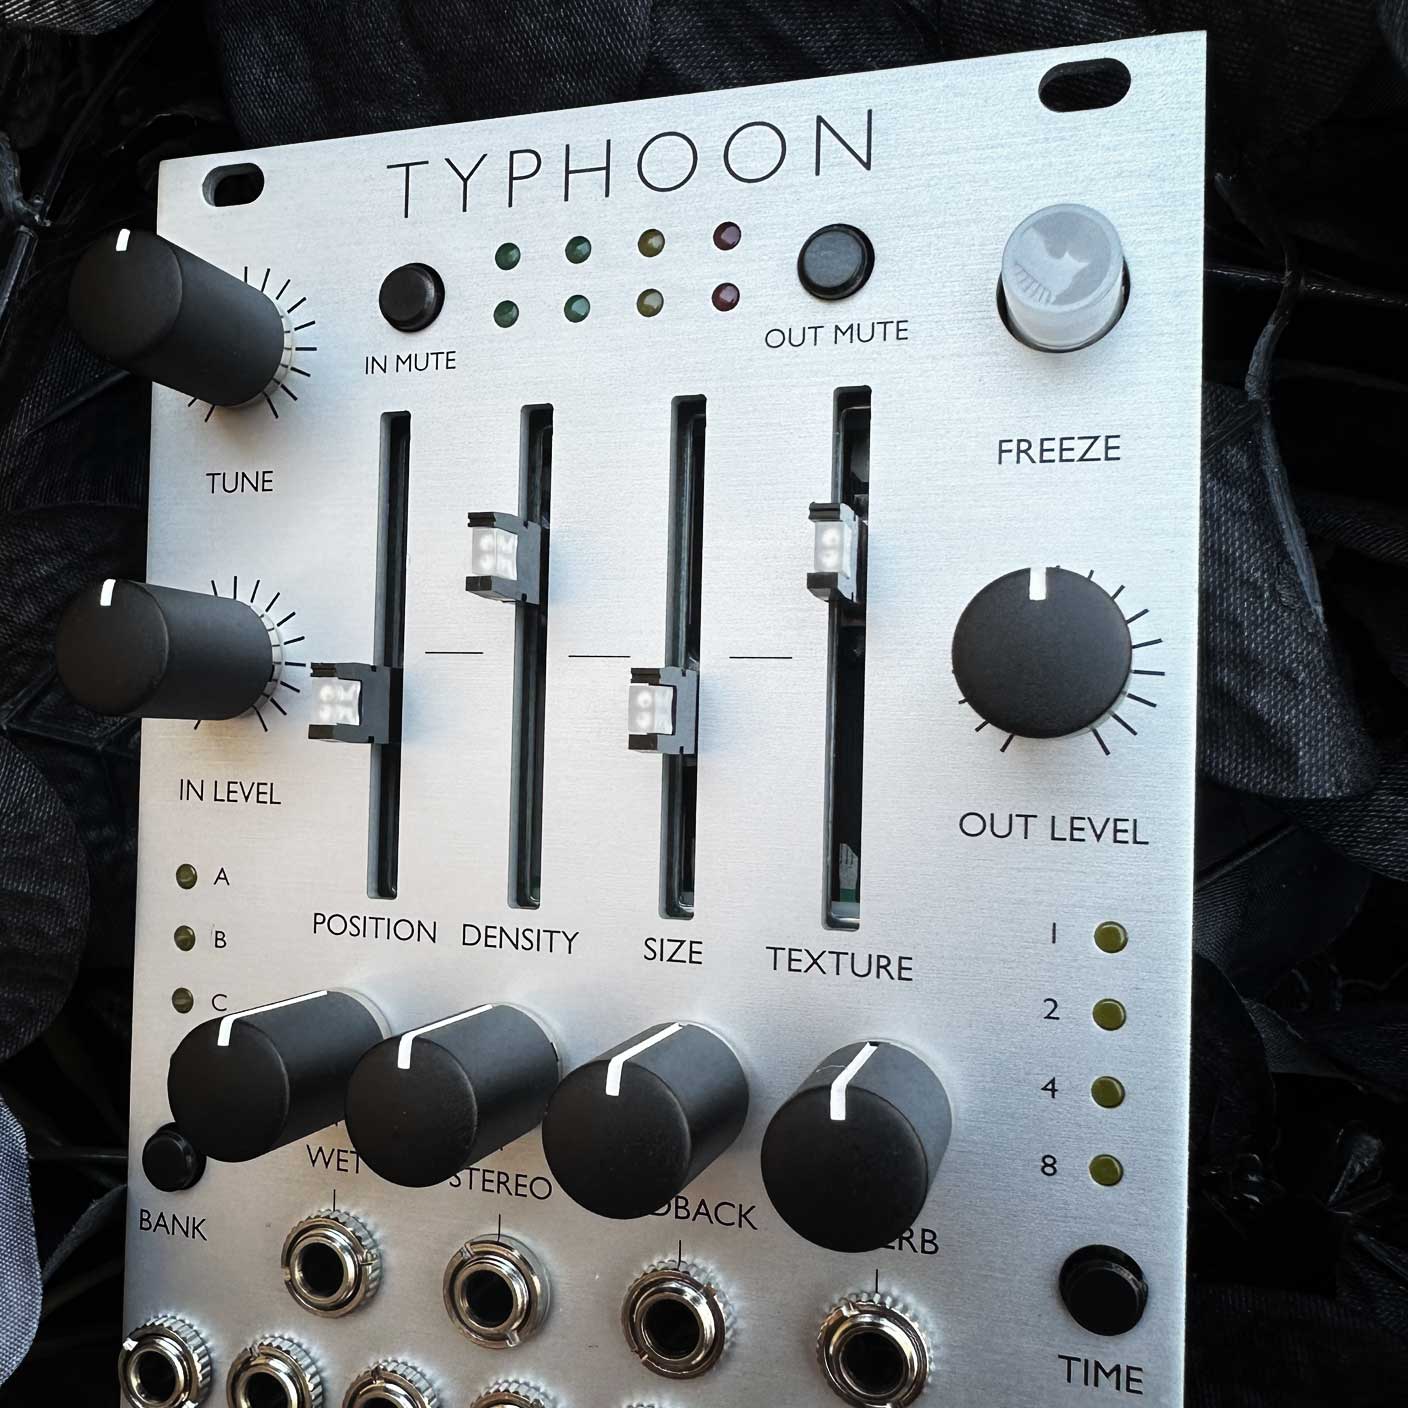 Typhoon (Expanded Mutable Clouds with sliders) Silver Aluminum